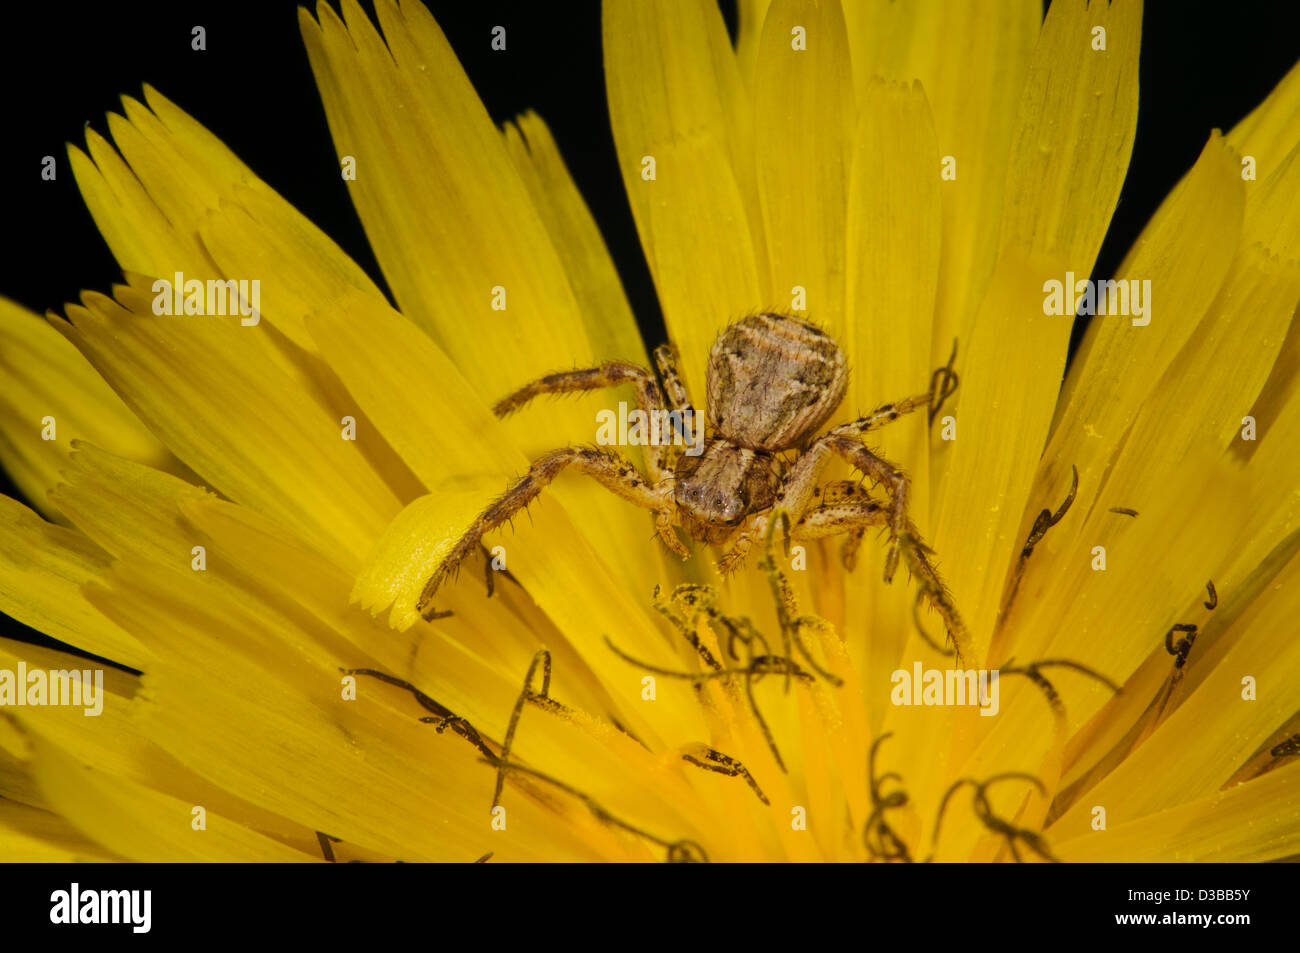 A common ground crab spider (Xysticus cristatus) lurking in a dandelion flower at Crossness Nature Reserve, Bexley, Kent. Stock Photo